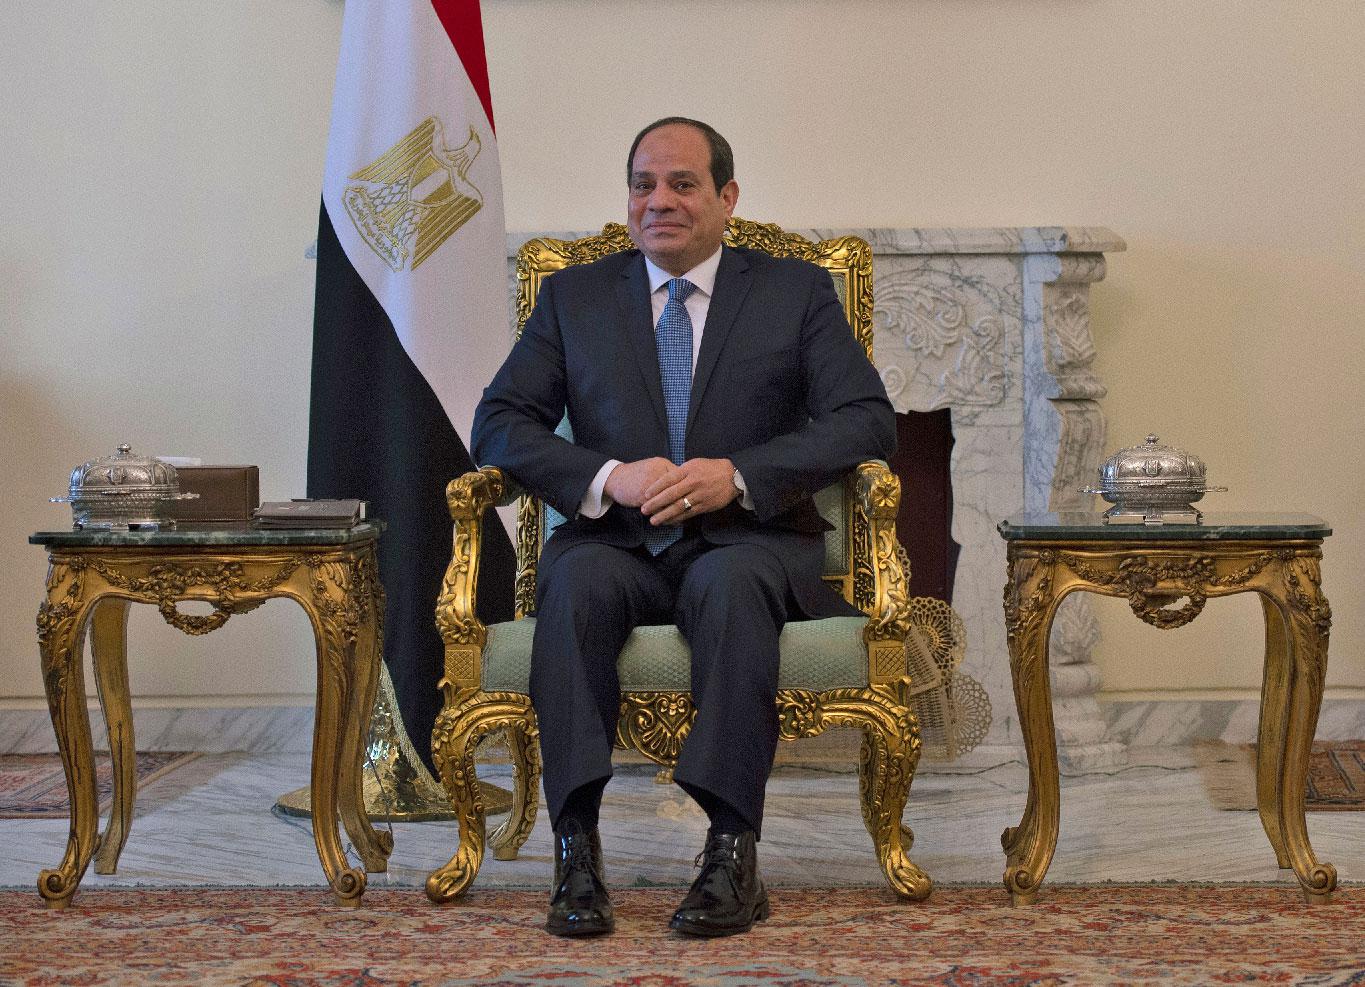 Egyptian President Abdel-Fattah el-Sissi meets with U.S. Secretary of State Mike Pompeo, in Cairo, Egypt on Jan. 10, 2019.